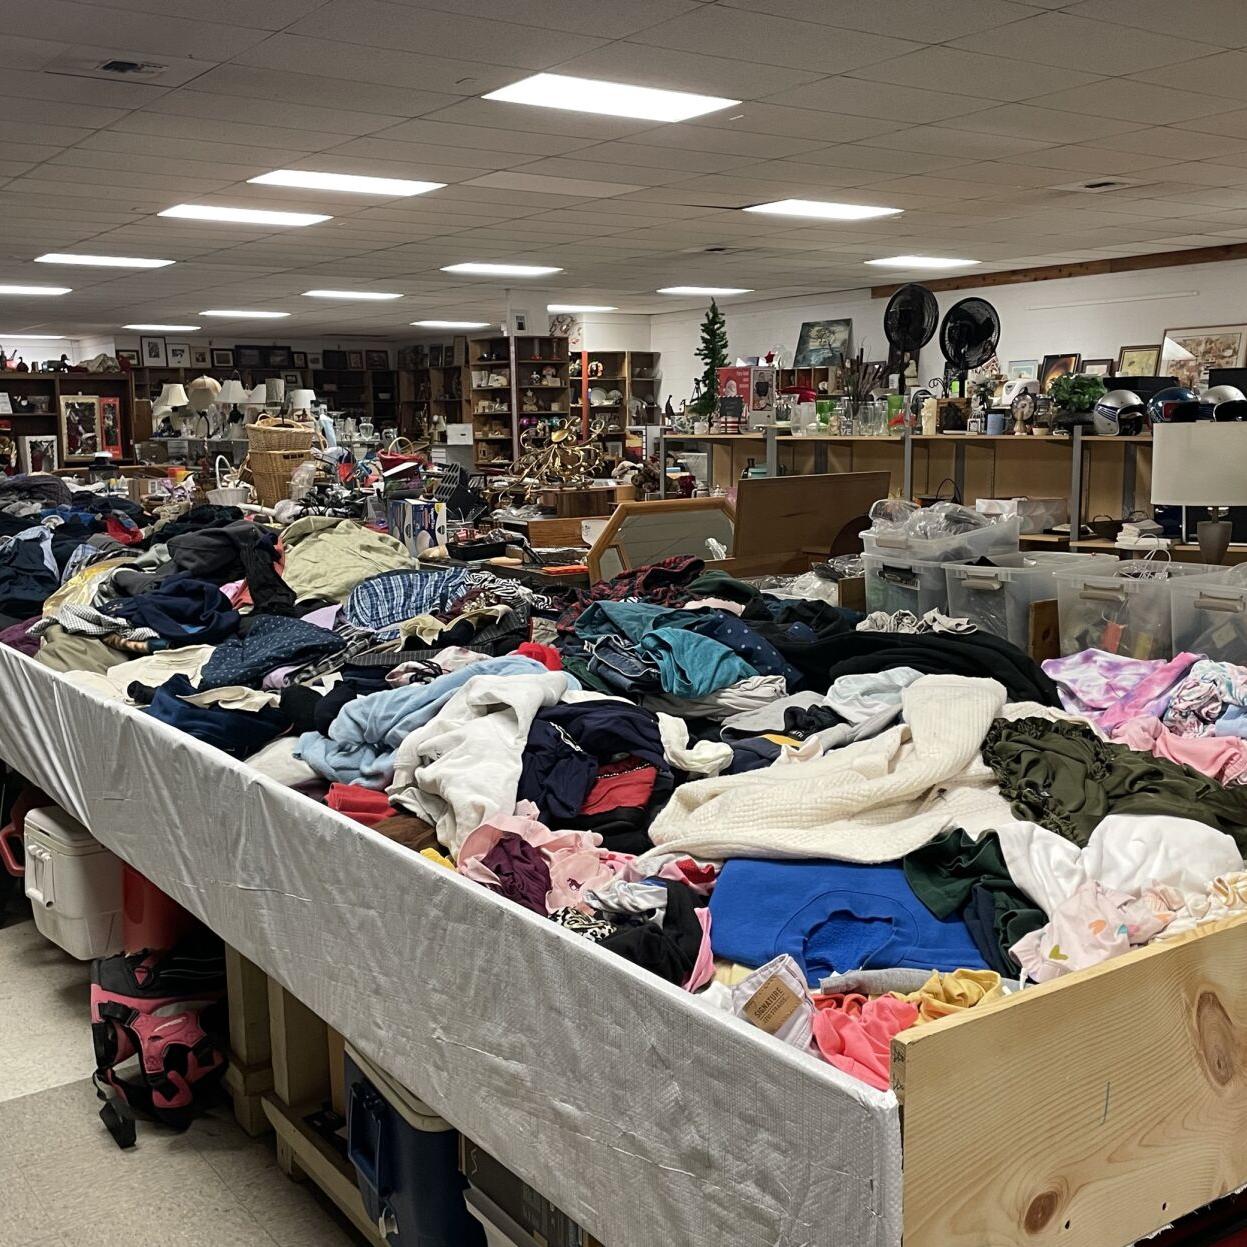 Fifty cent thrift store opens in Spokane Valley, News